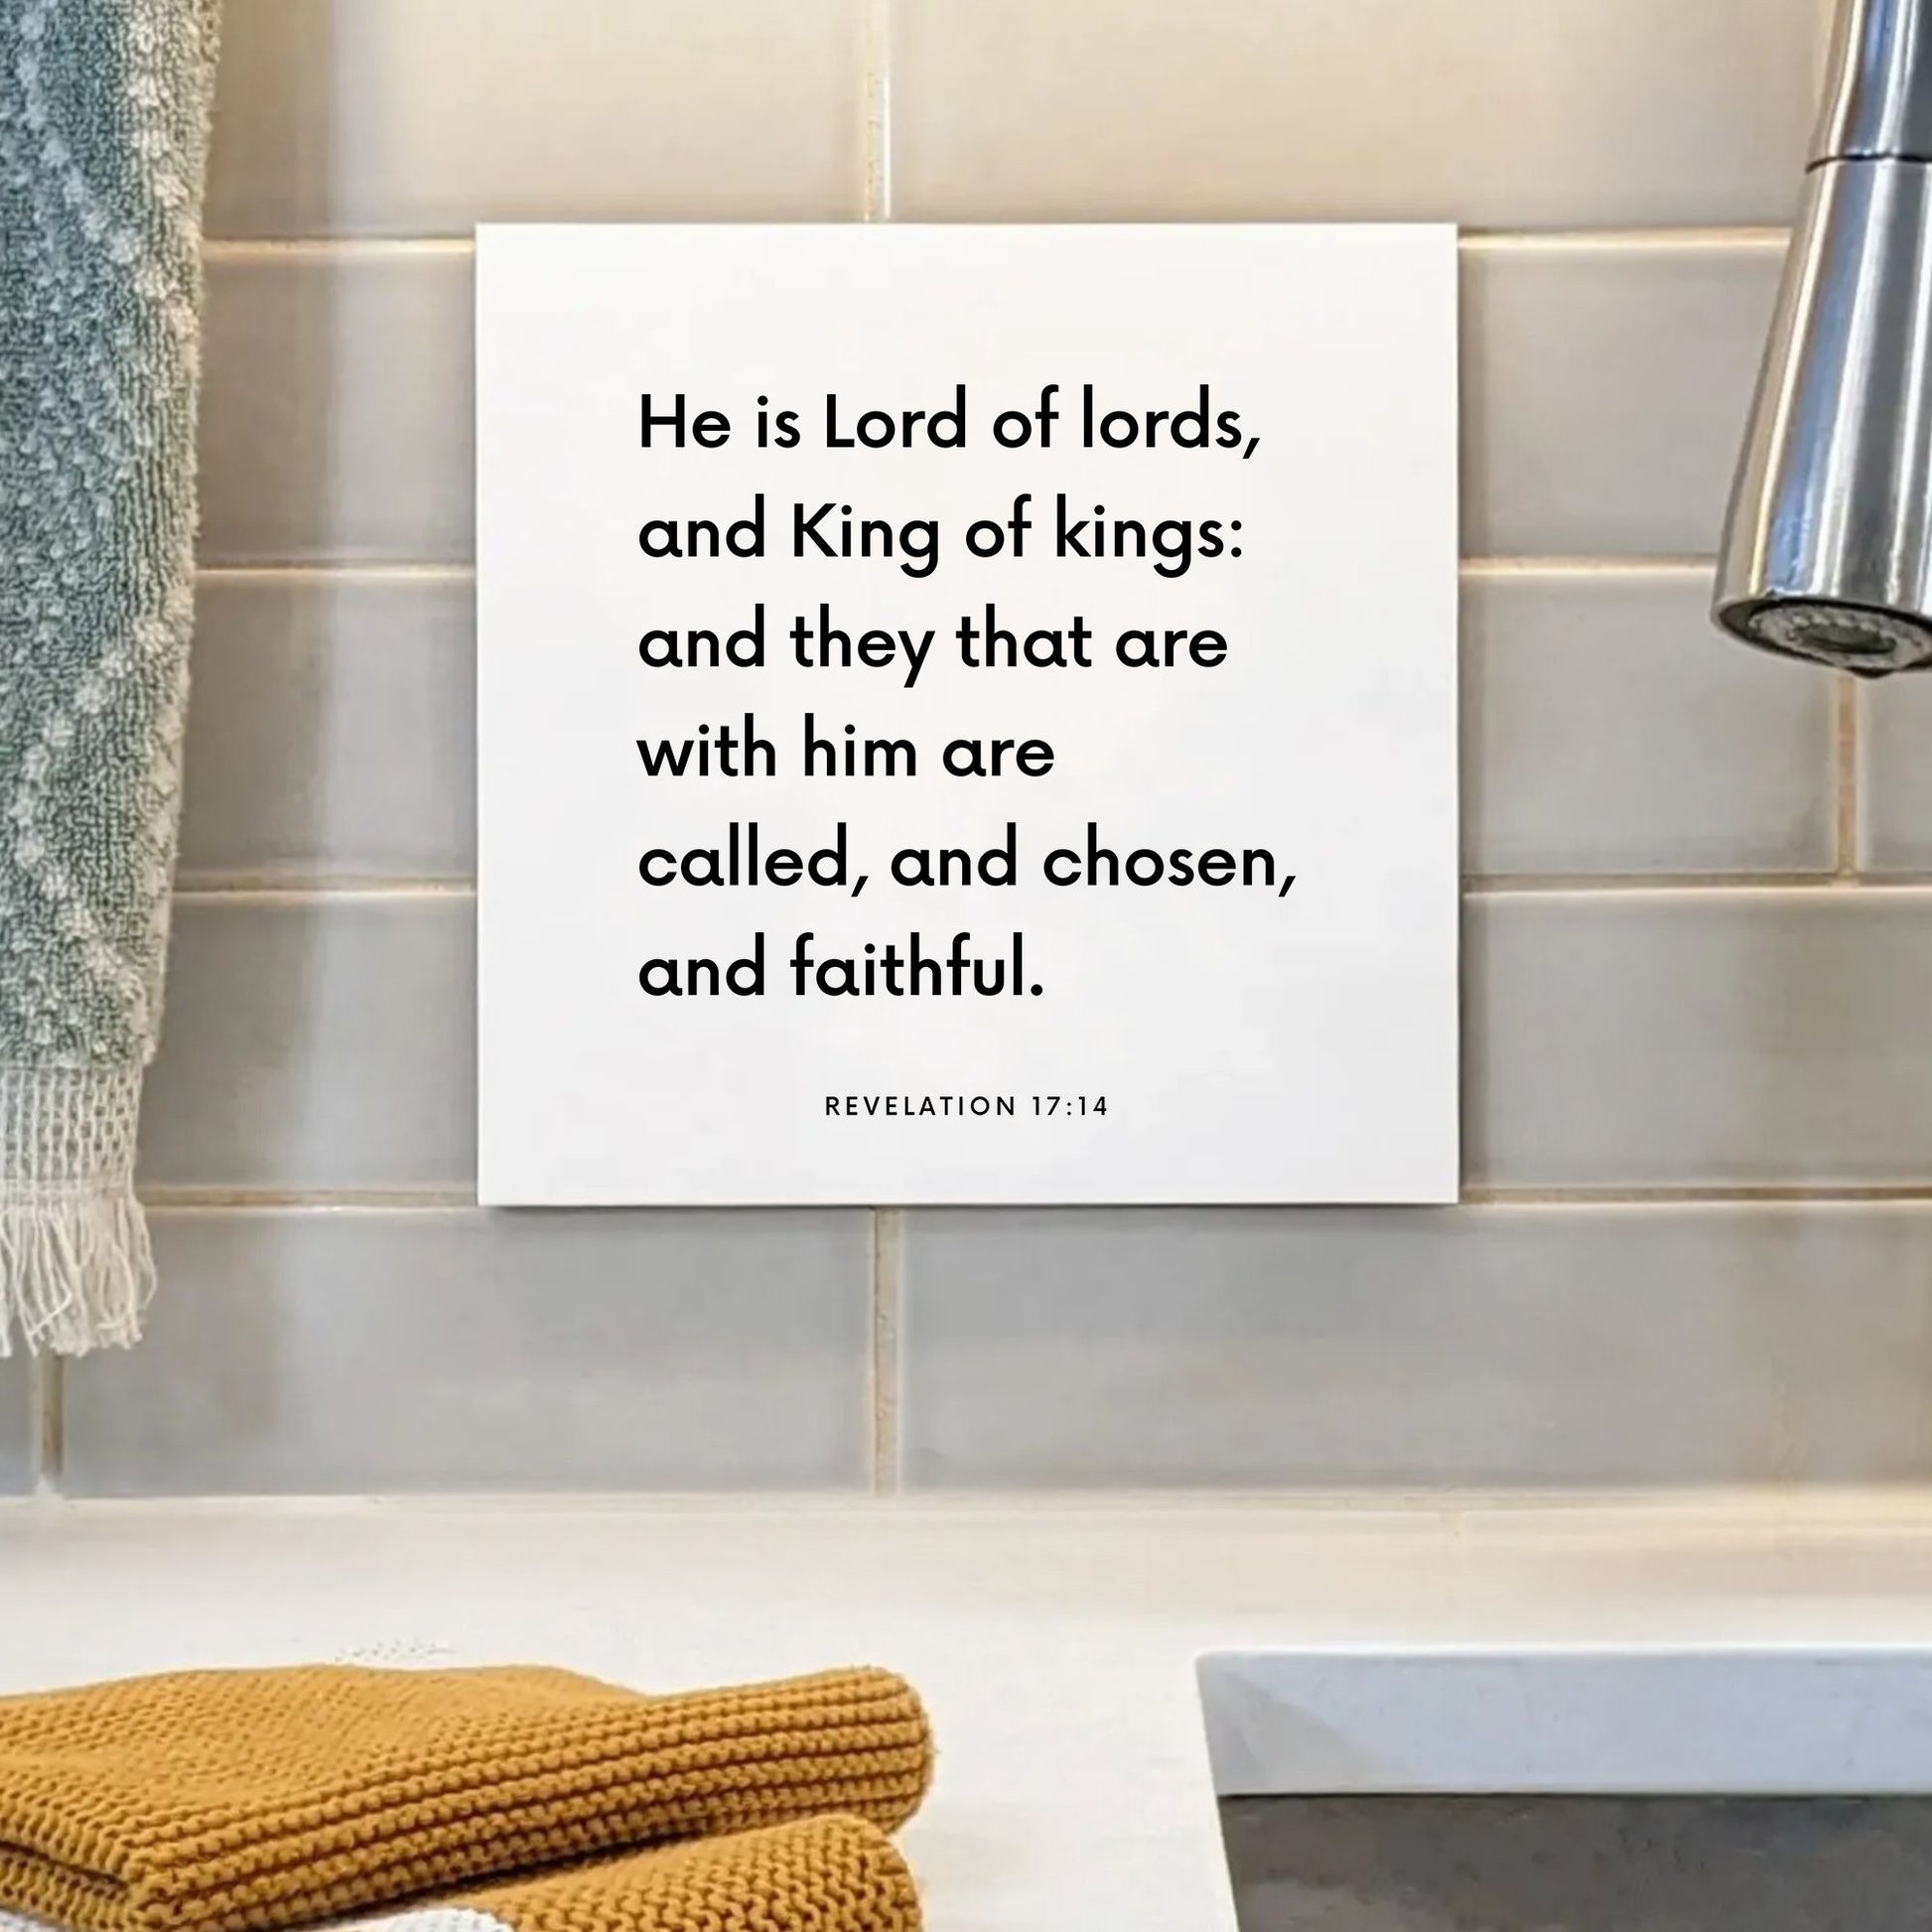 Sink mouting of the scripture tile for Revelation 17:14 - "He is Lord of lords, and King of kings"